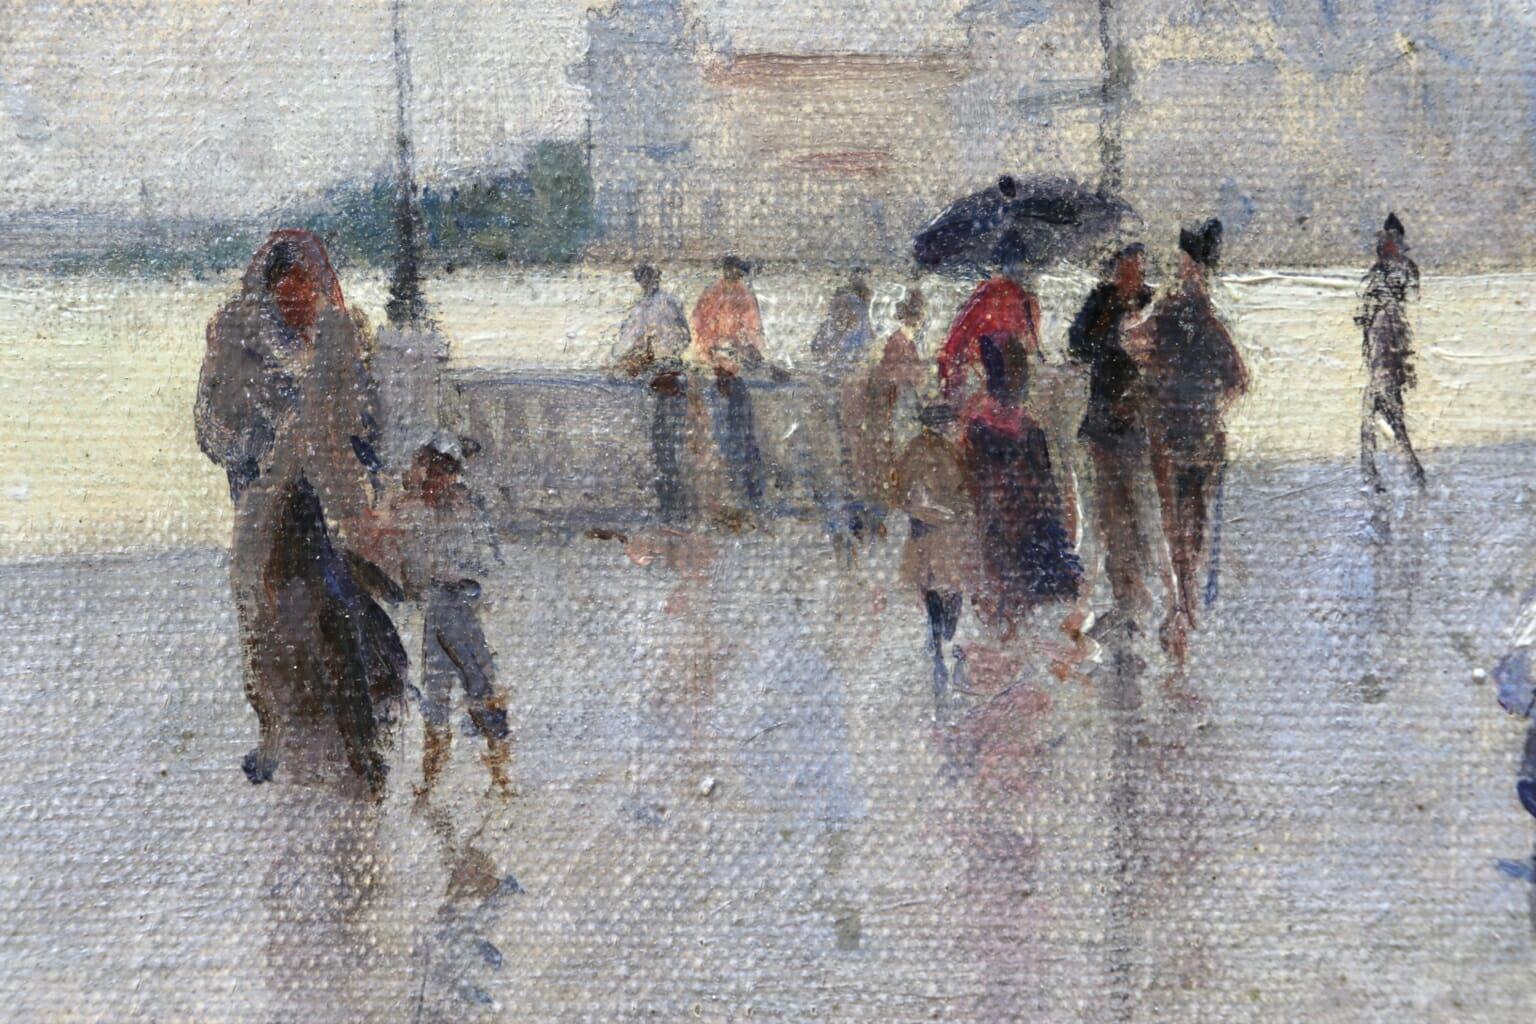 A stunning oil on original canvas by Italian painter Giuseppe De Nittis. The painting depicts figures walking up and down the promenade along River Degli Schiavone, Venice. 

The work is executed on a Lefranc & Cie canvas which is stamped verso with